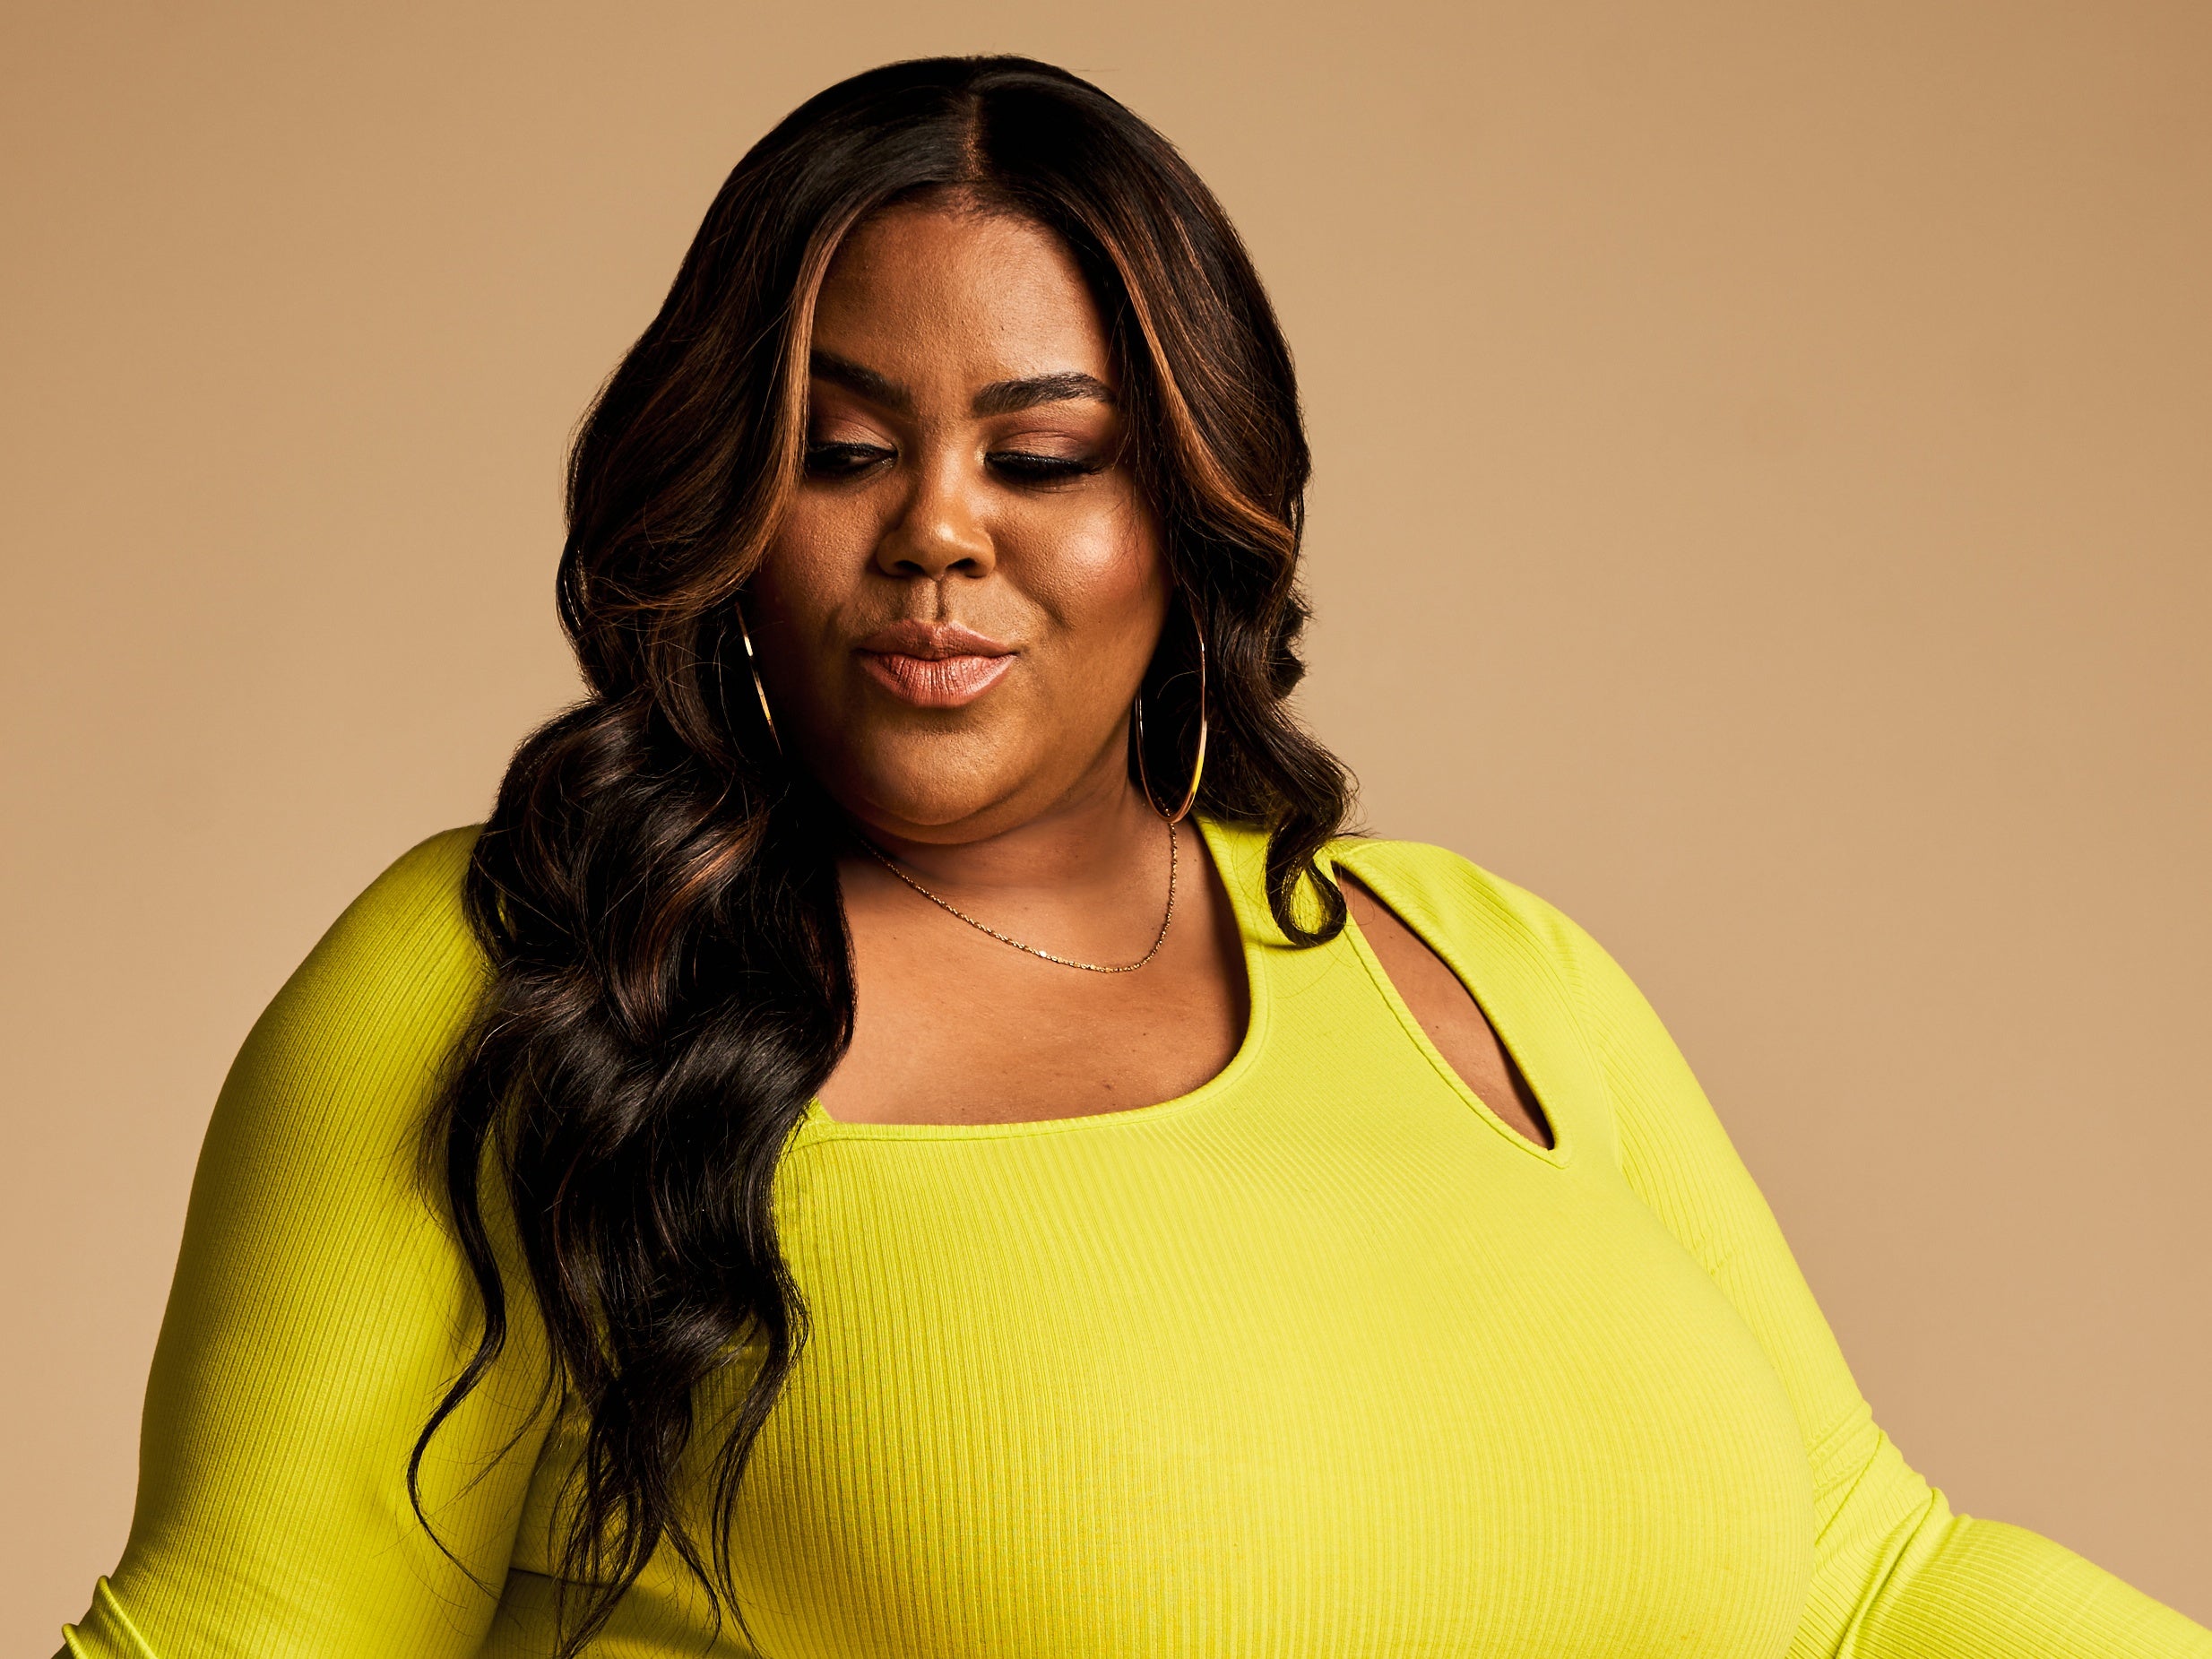 Nina Parker Debuts Plus-Size Collection With Macy's